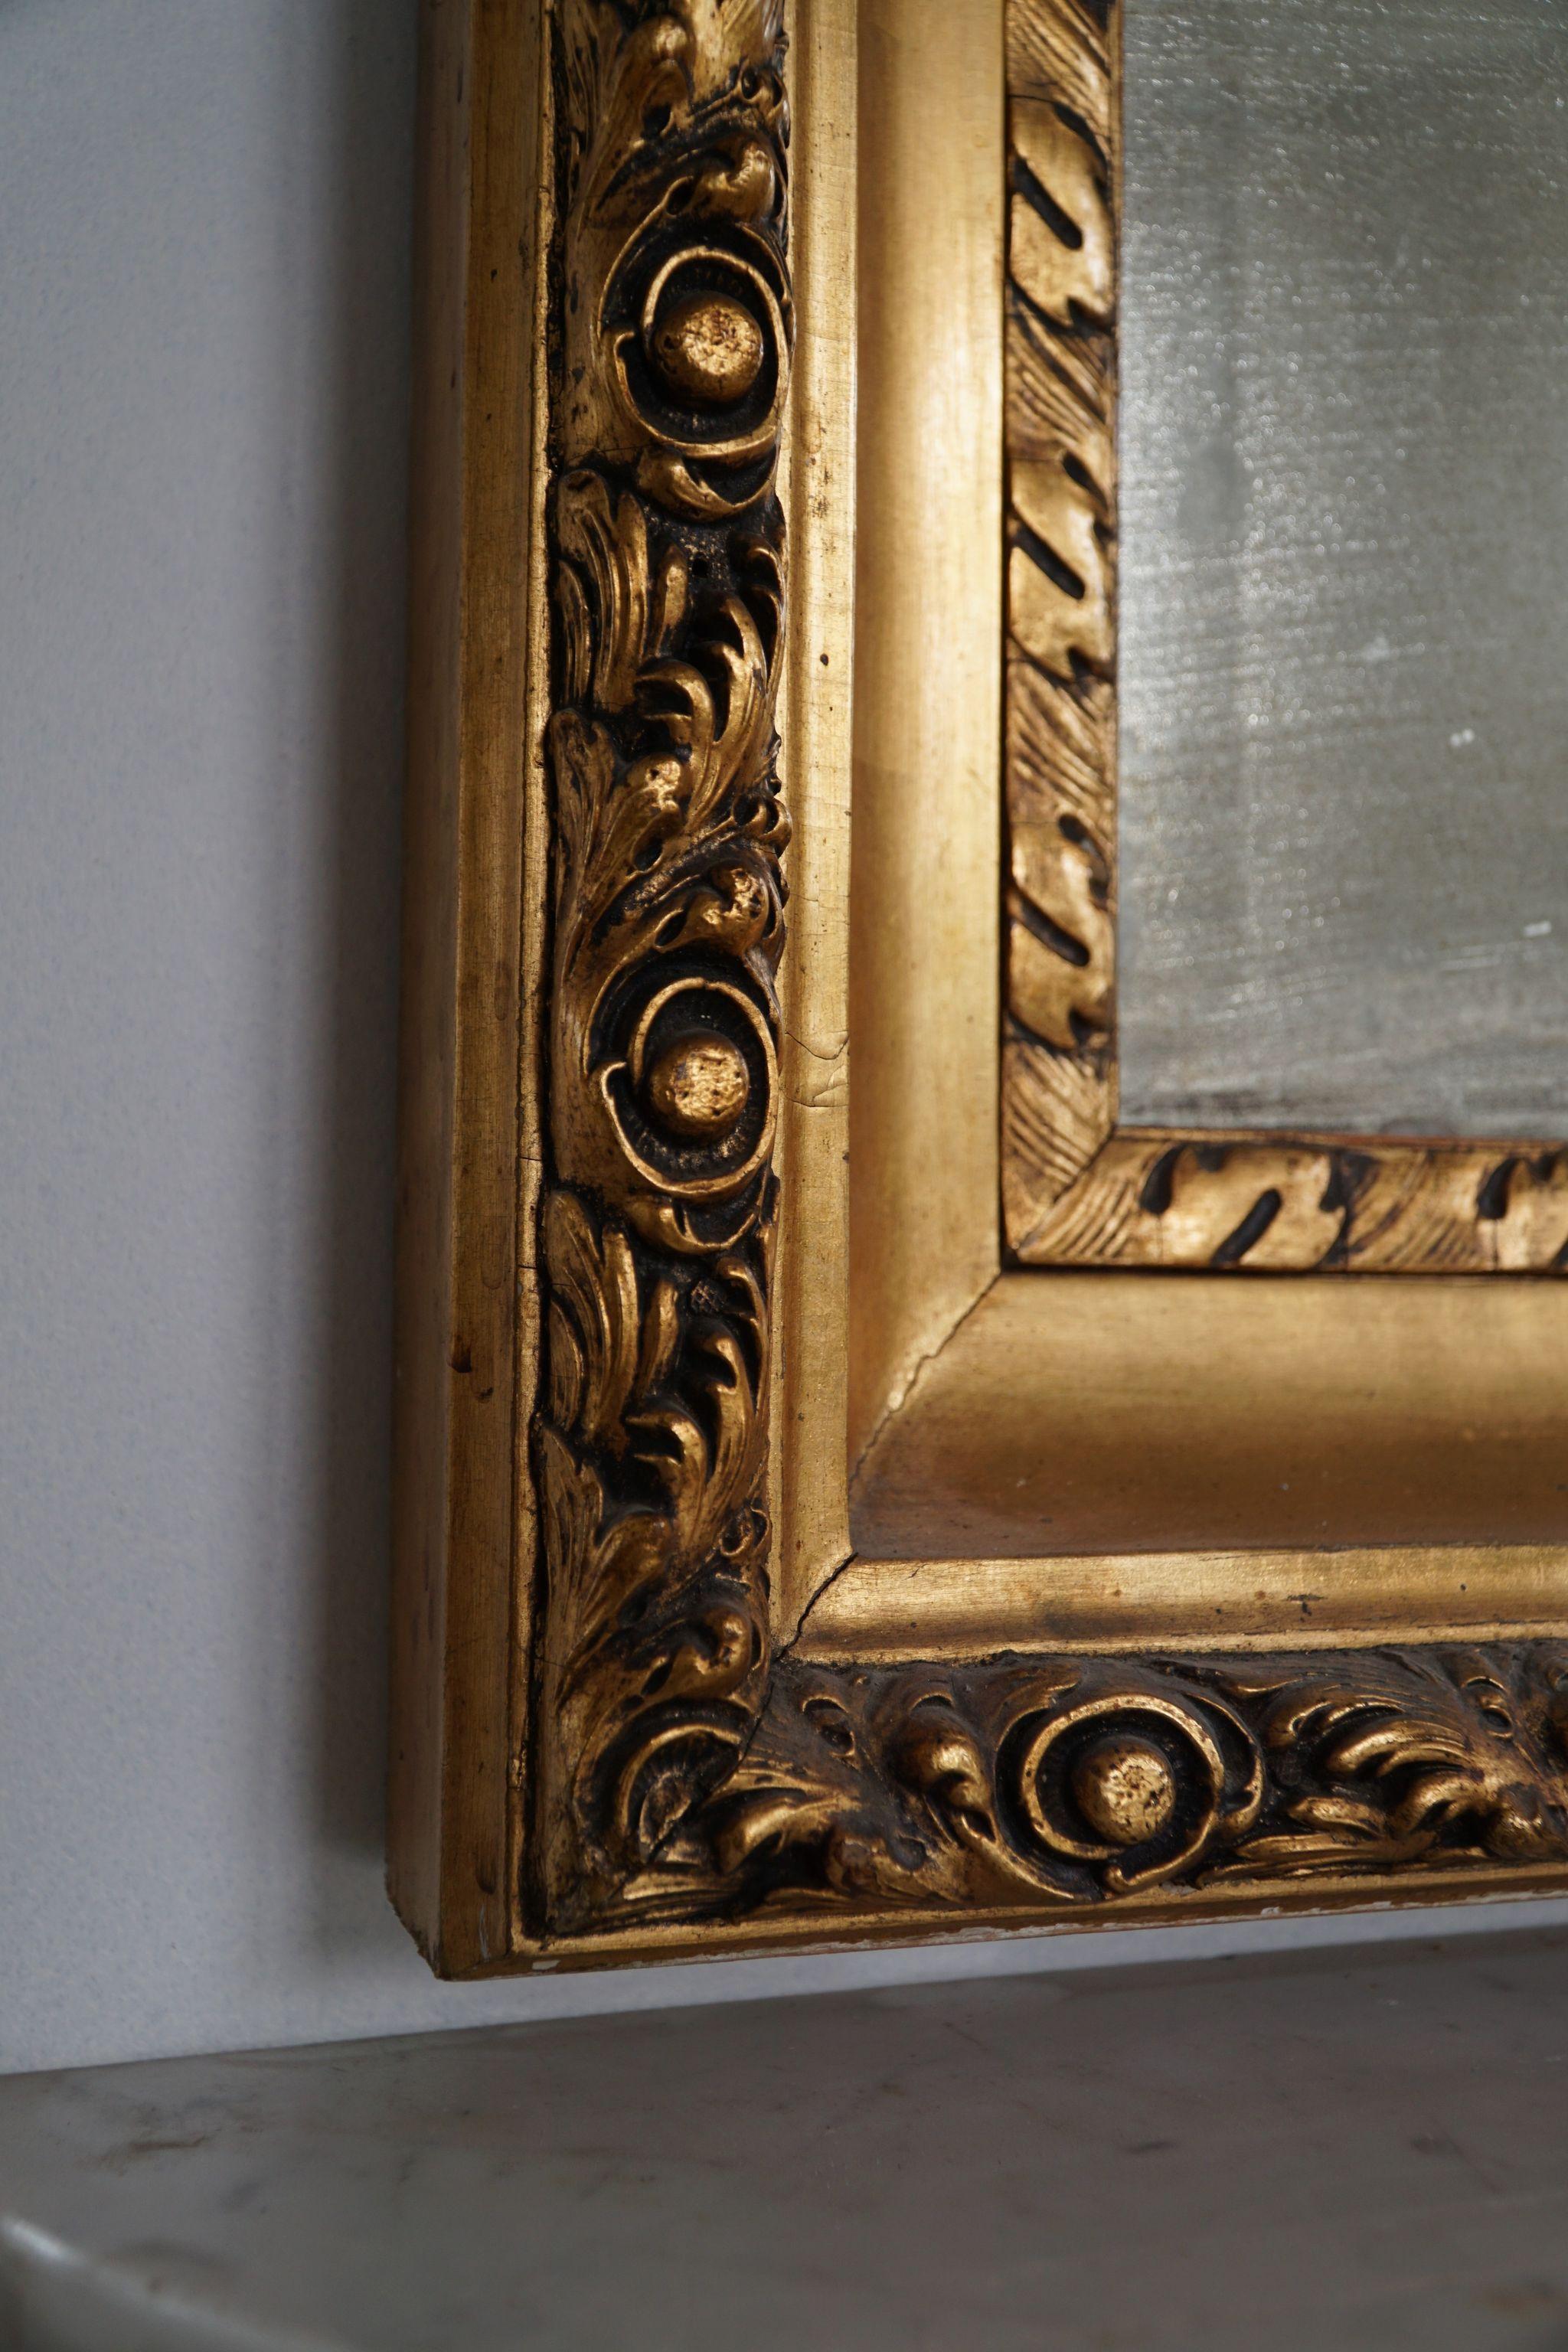 Antique Danish Mid-19th Century Rococo Gold Plated Mirror For Sale 11